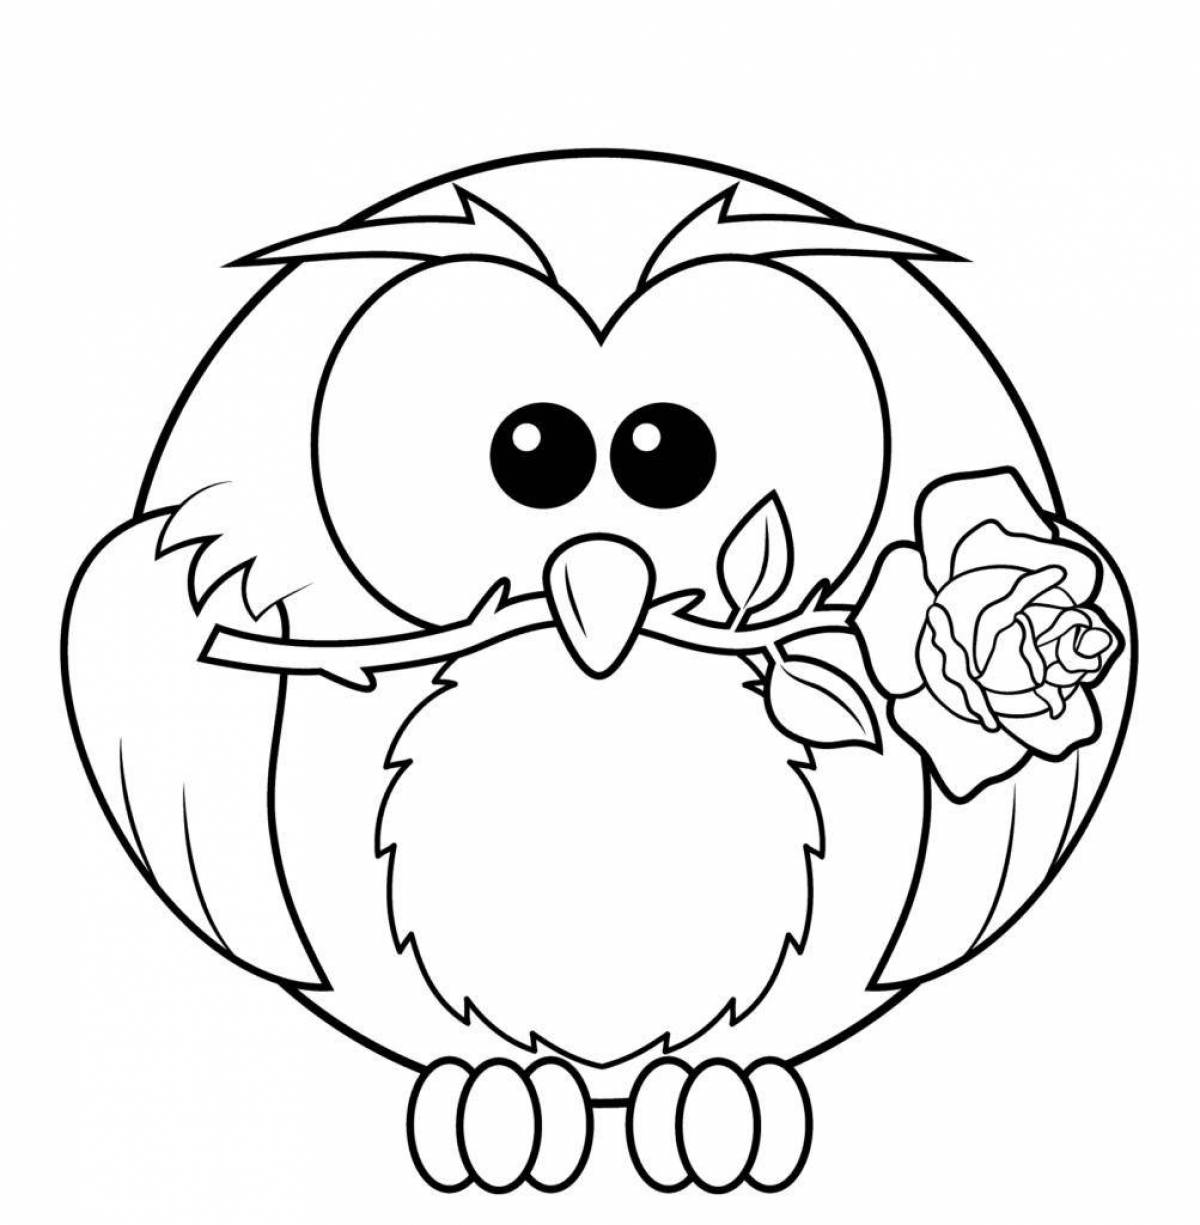 Radiant coloring page owl image